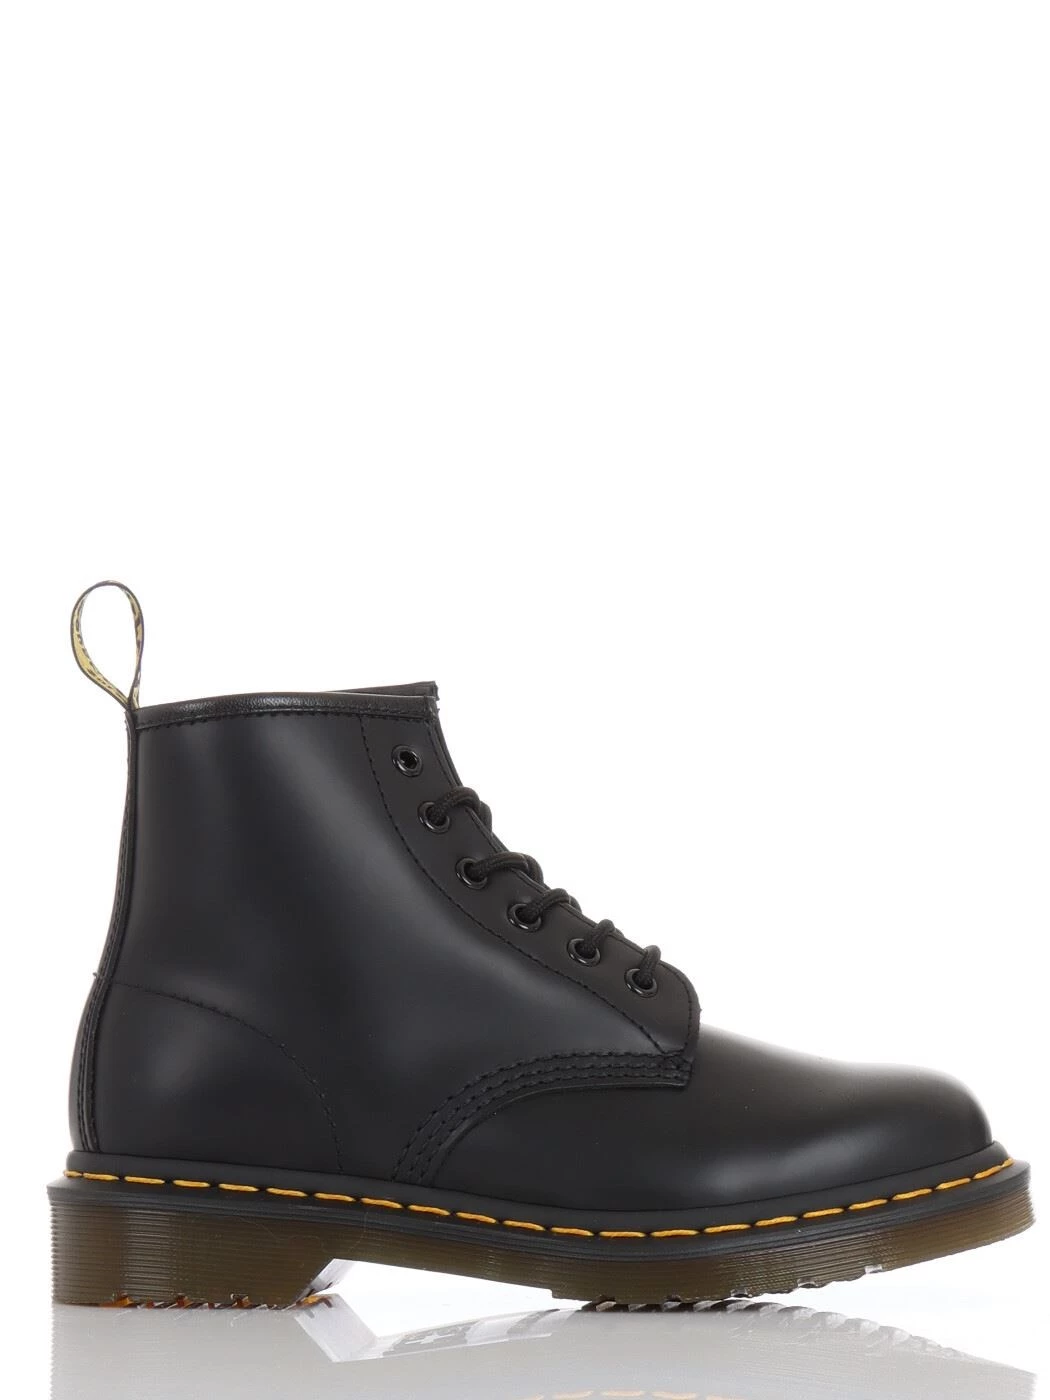 ANFIBI DR.MARTENS 101 YS SMOOTH